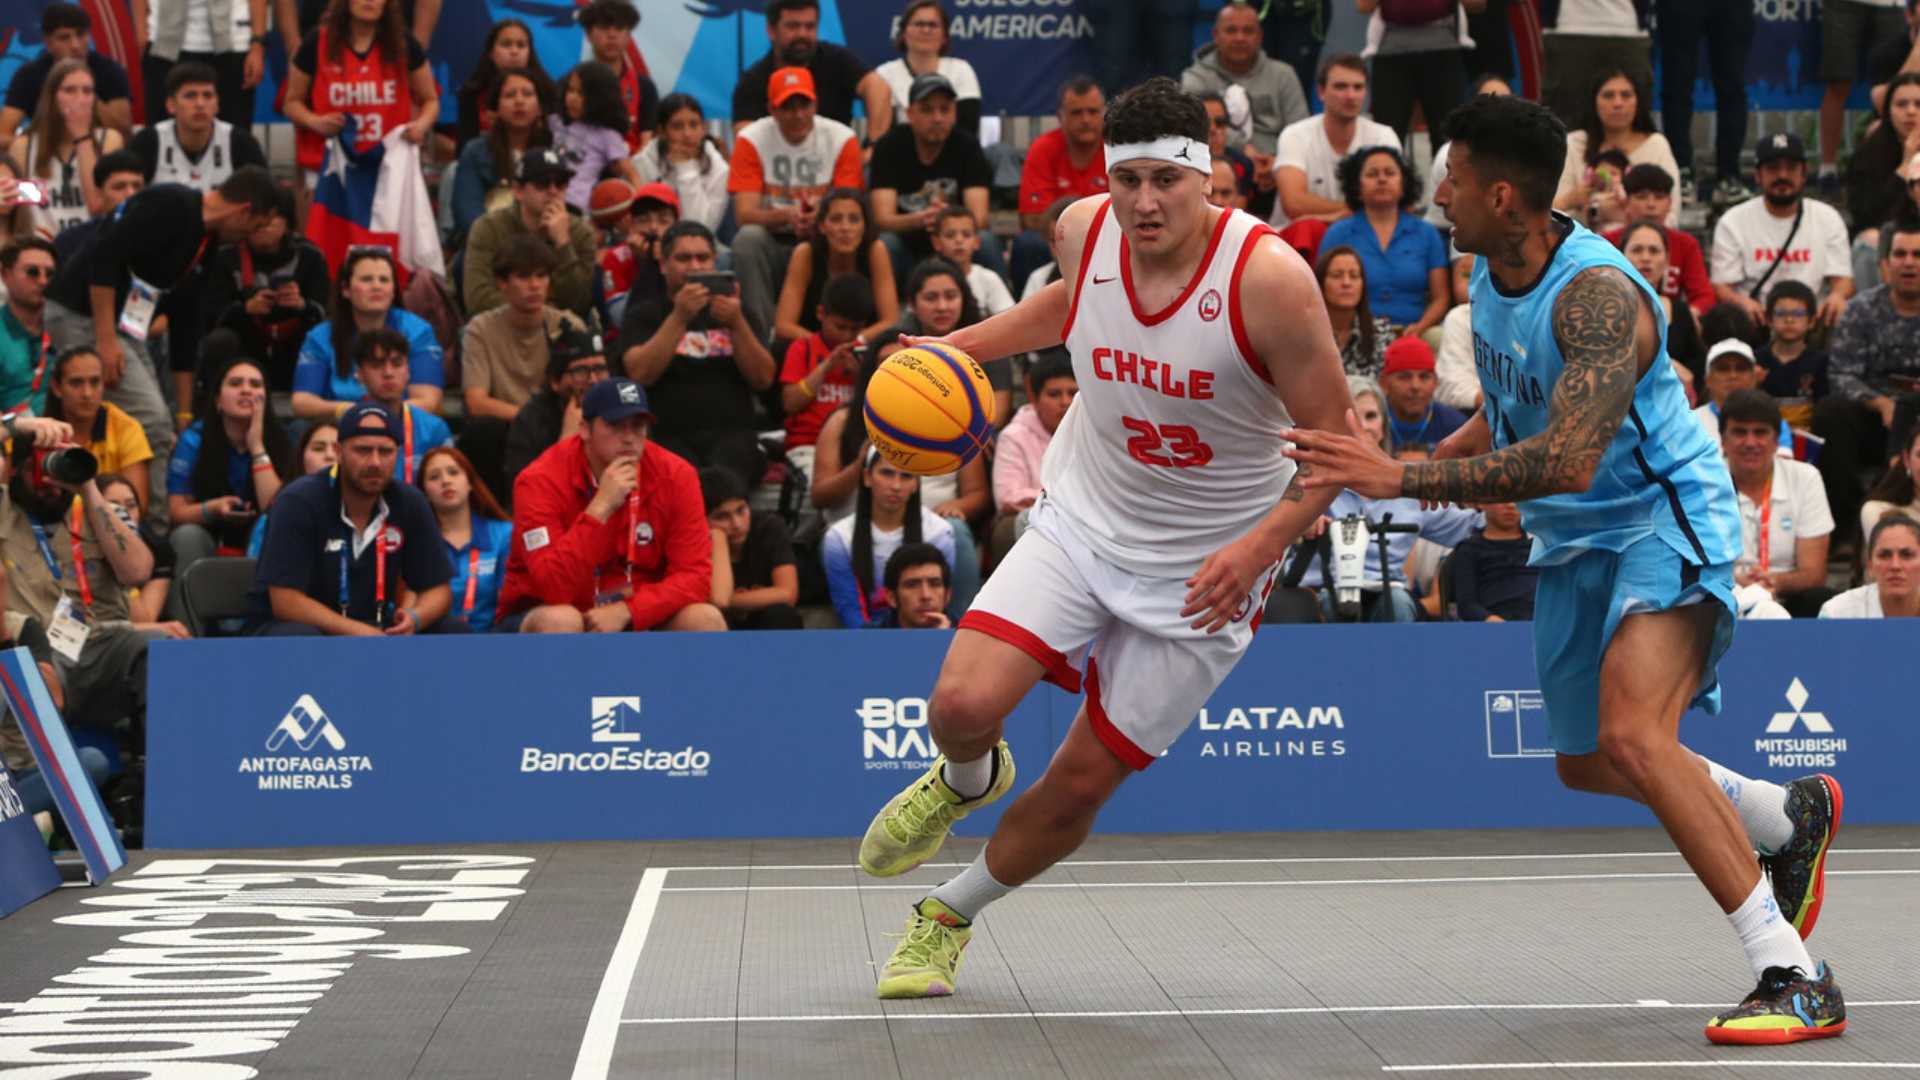 Chile defeats Argentina in 3x3 basketball, advances to semifinals